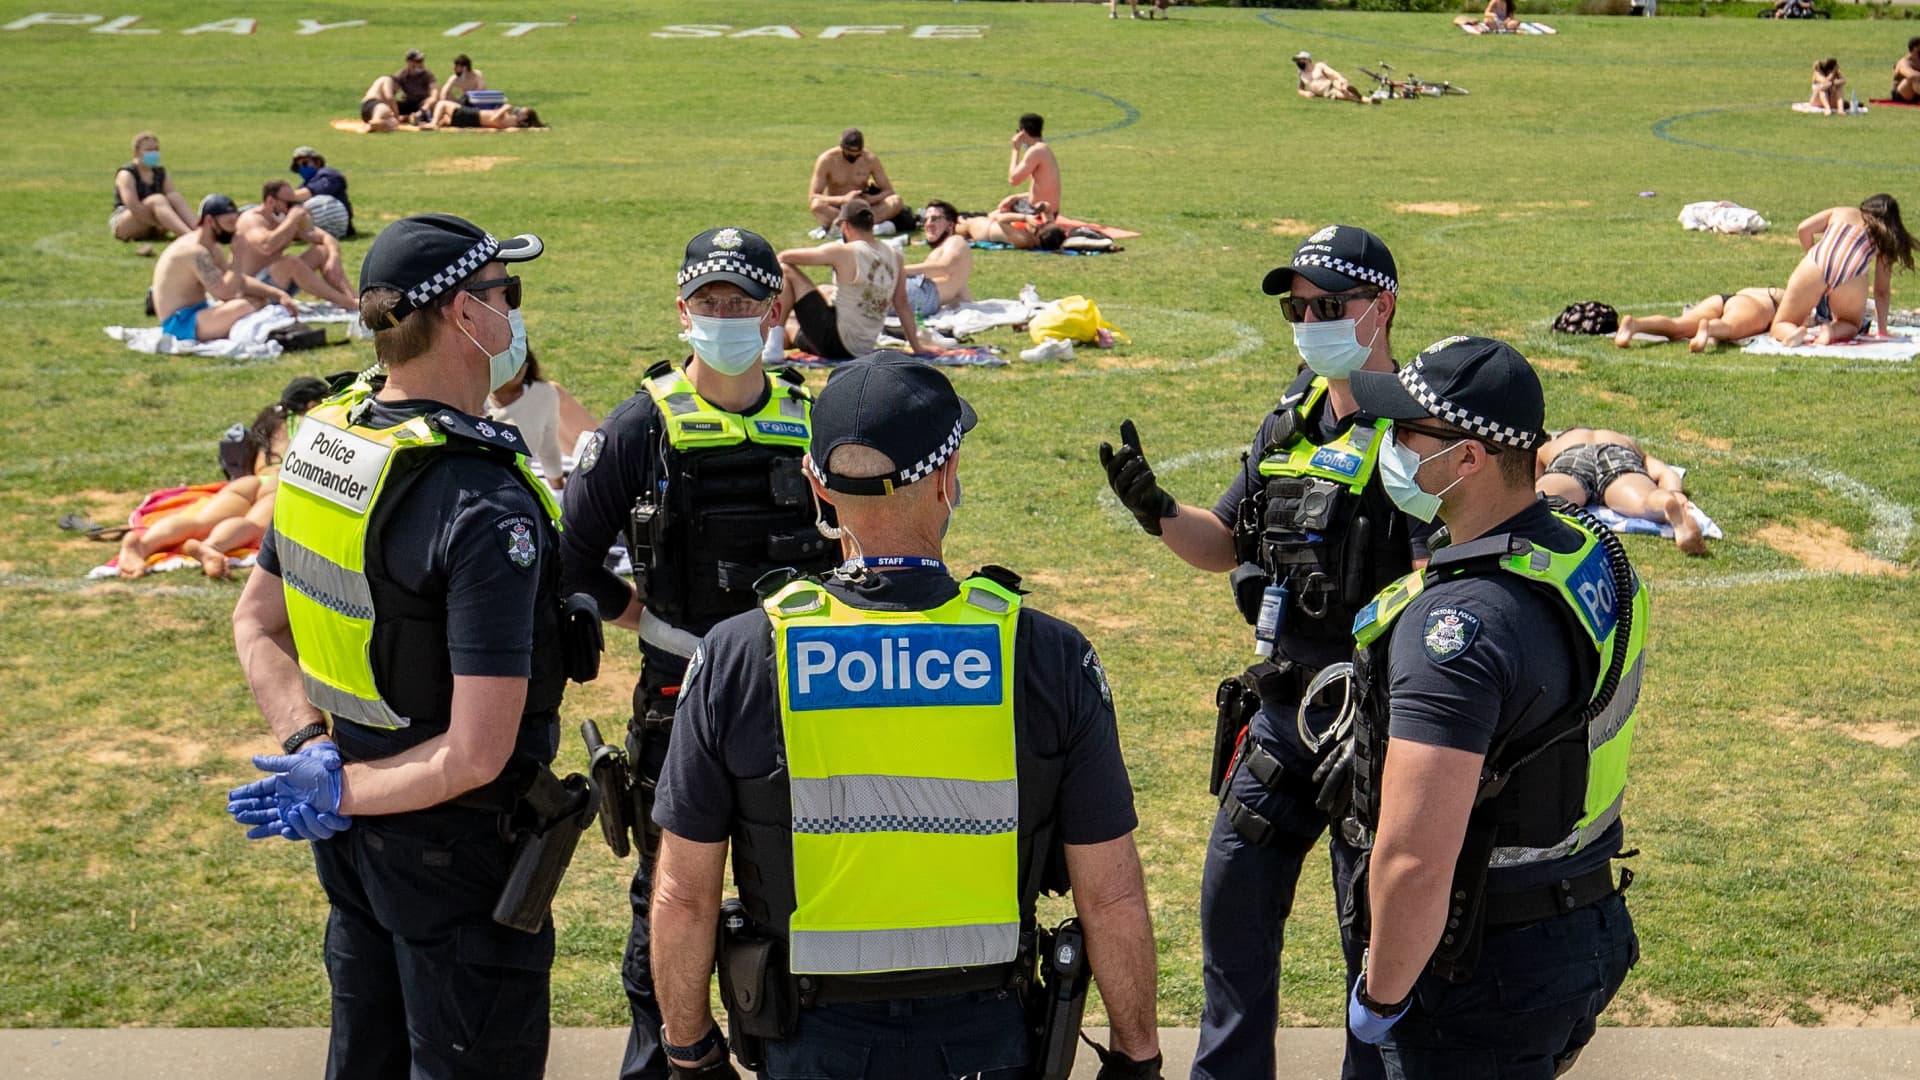 Victoria Police patrol at St Kilda beach on October 03, 2020 in Melbourne, Australia. Coronavirus restrictions eased slightly across Melbourne from Monday 28 September as Victoria enters into its second step in the government's roadmap to reopening.